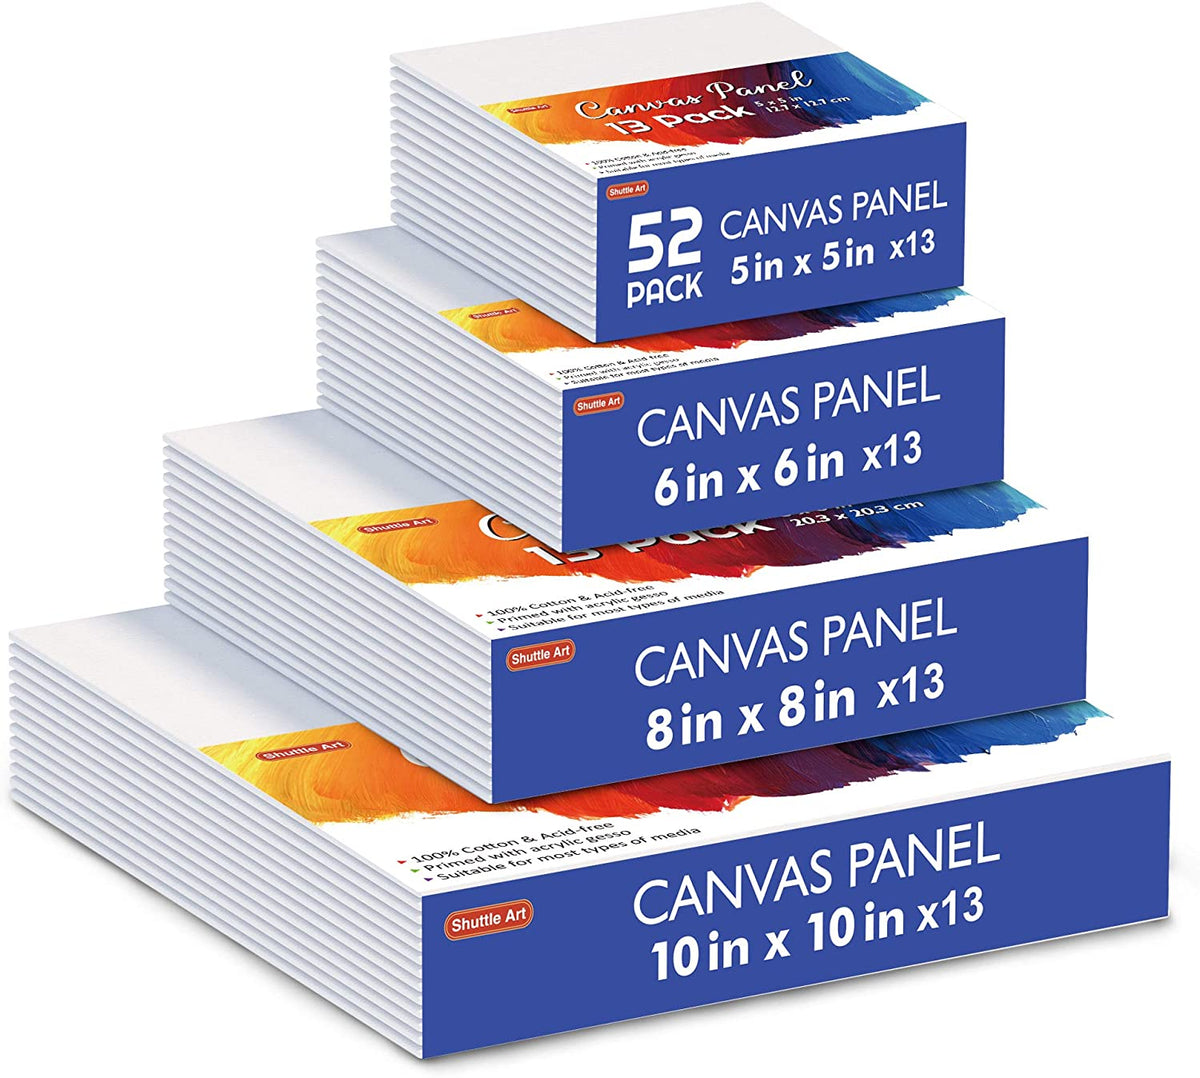 Shuttle Art Painting Canvas Panels, 36 Pack, 5x7, 8x10in (18 of Each), 100%  Cotton, Primed White Canvas Boards for Painting, Blank Canvases for Kids,  Adults, Artists for Acrylic and Oil Painting 